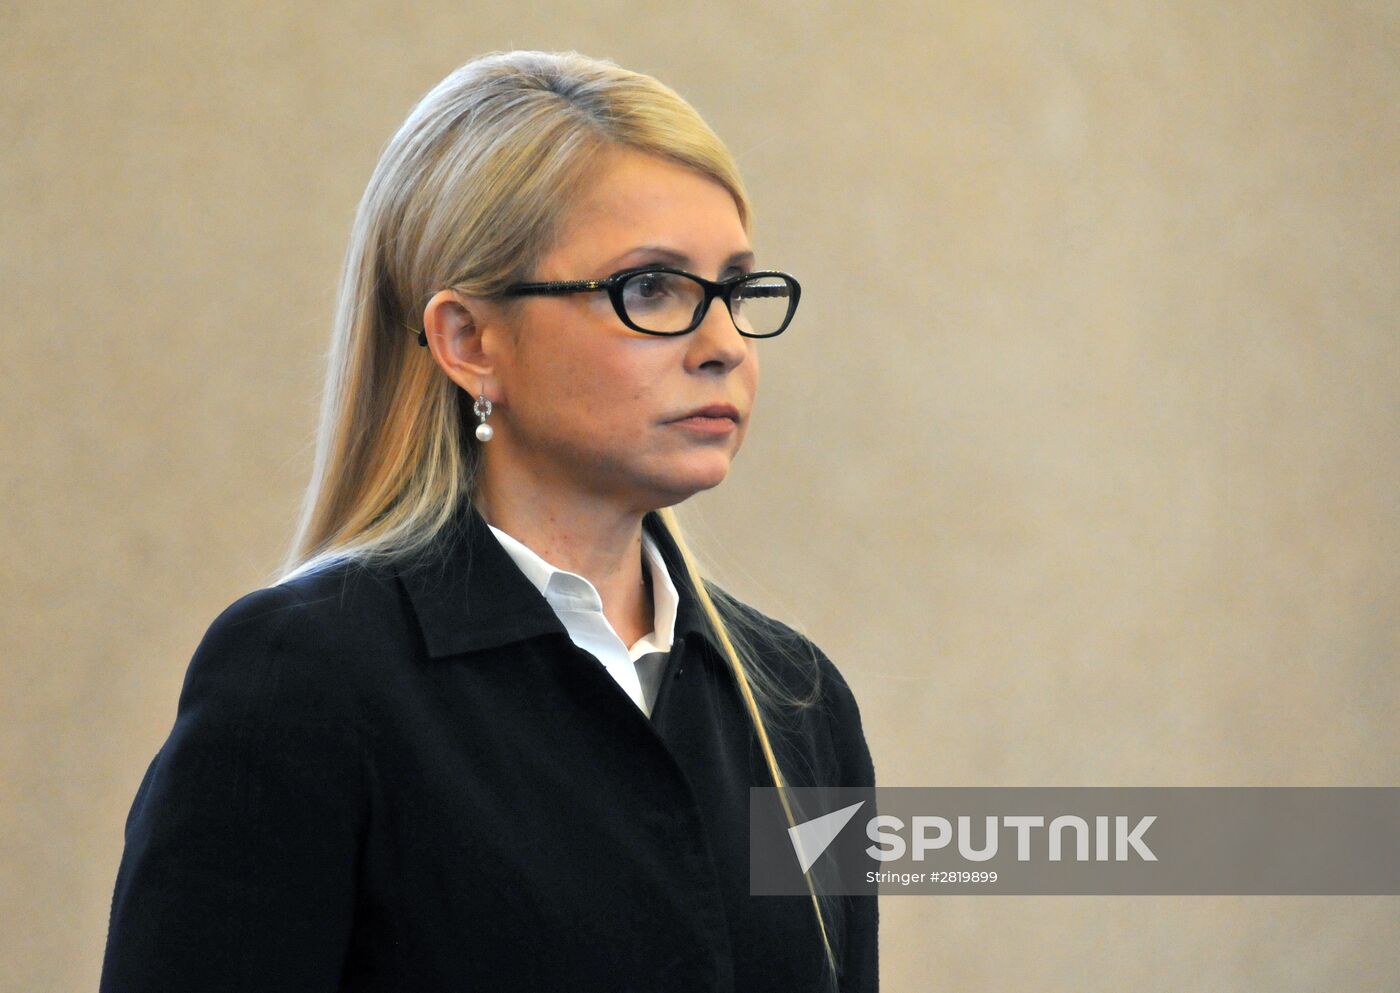 News conference with Yulia Timoshenko in Lvov